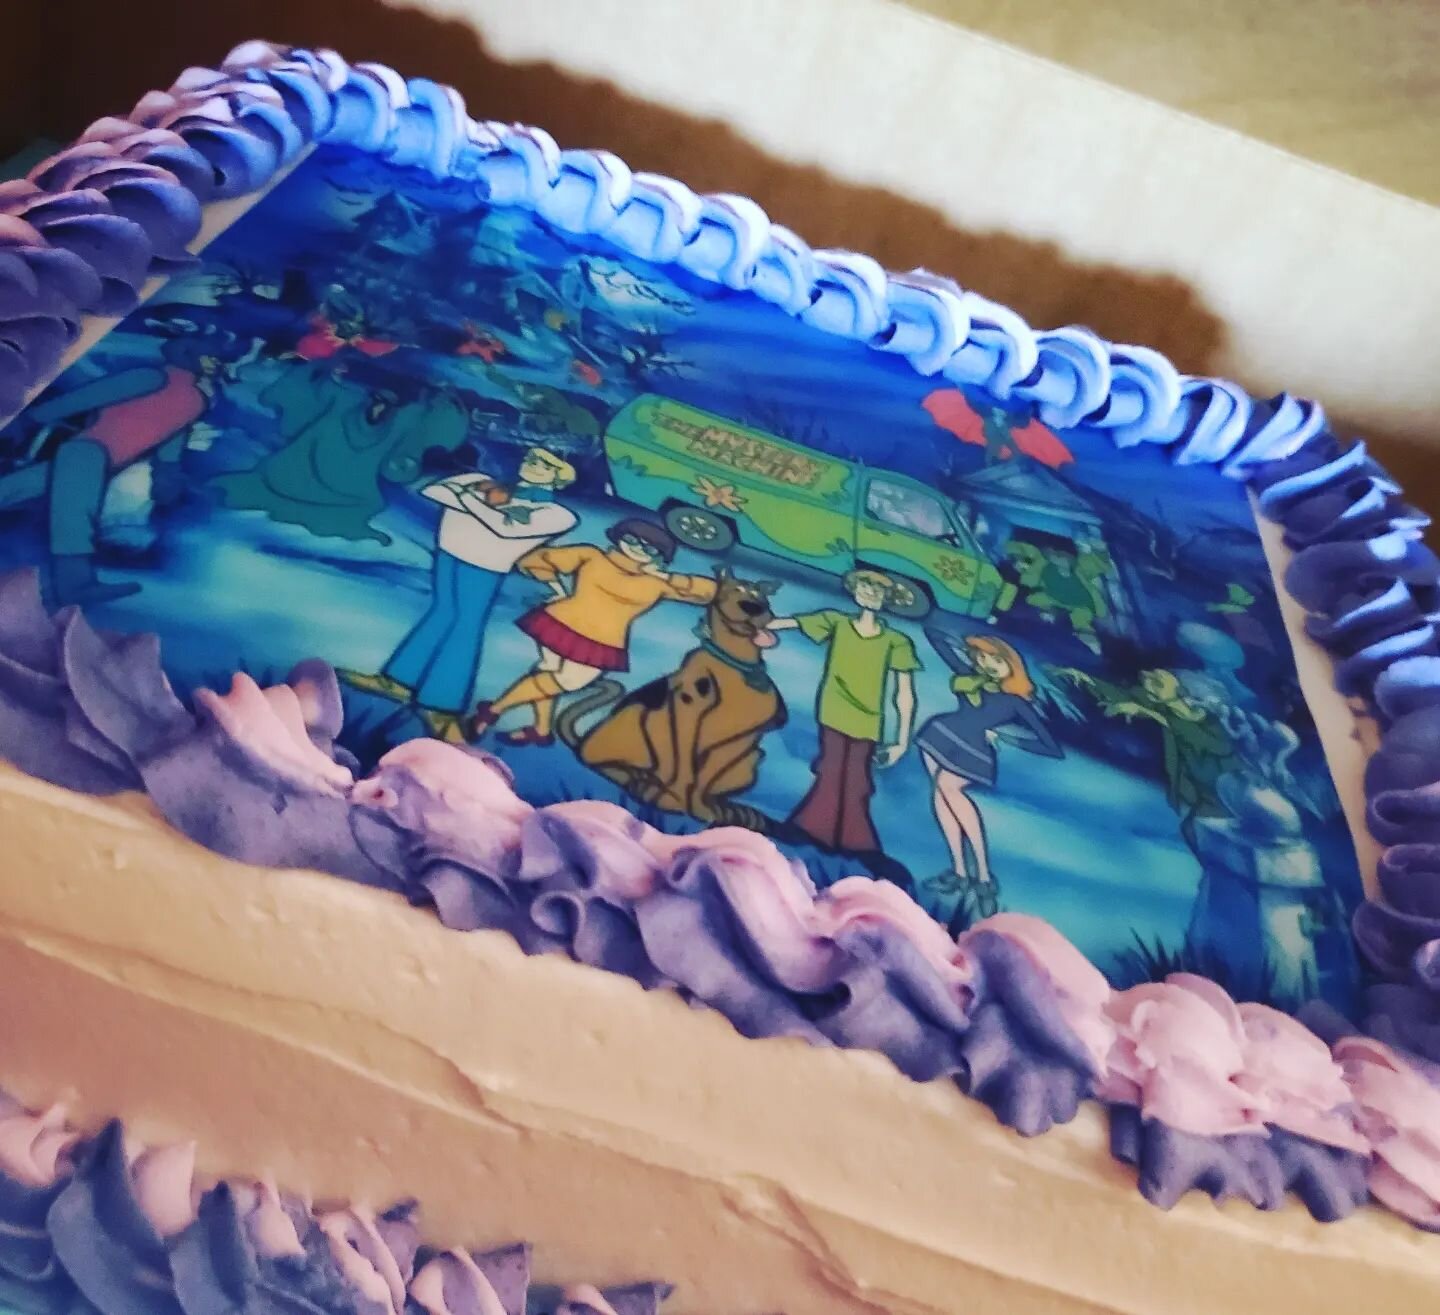 Just a cool peek at Madalynn's Scooby Doo birthday cake.  I can't believe the baby I was pregnant with when we opened Imagine just turned 11. Where has the time gone? 

Need a sheet cake for a birthday? Email me at kristie@imaginevegancafe.com 
#momb